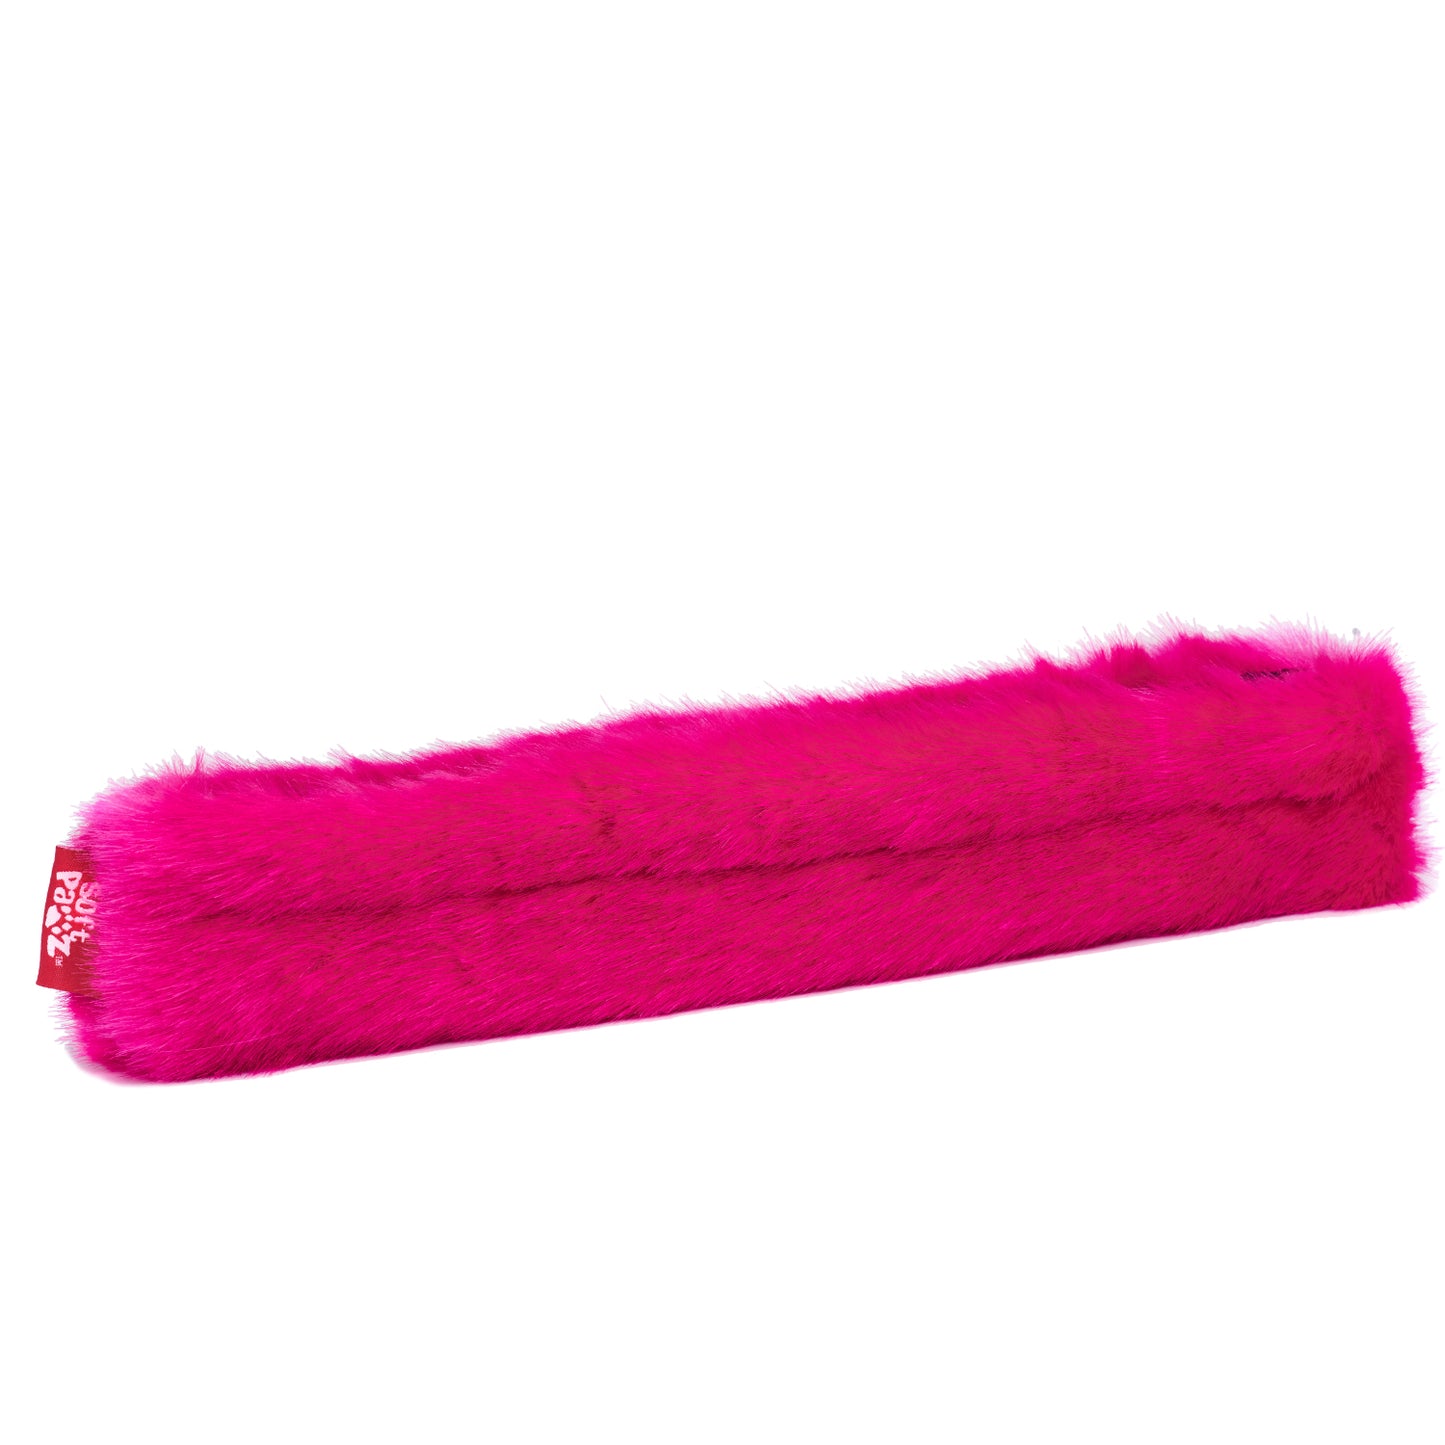 a pink toothbrush is sitting on a white surface 